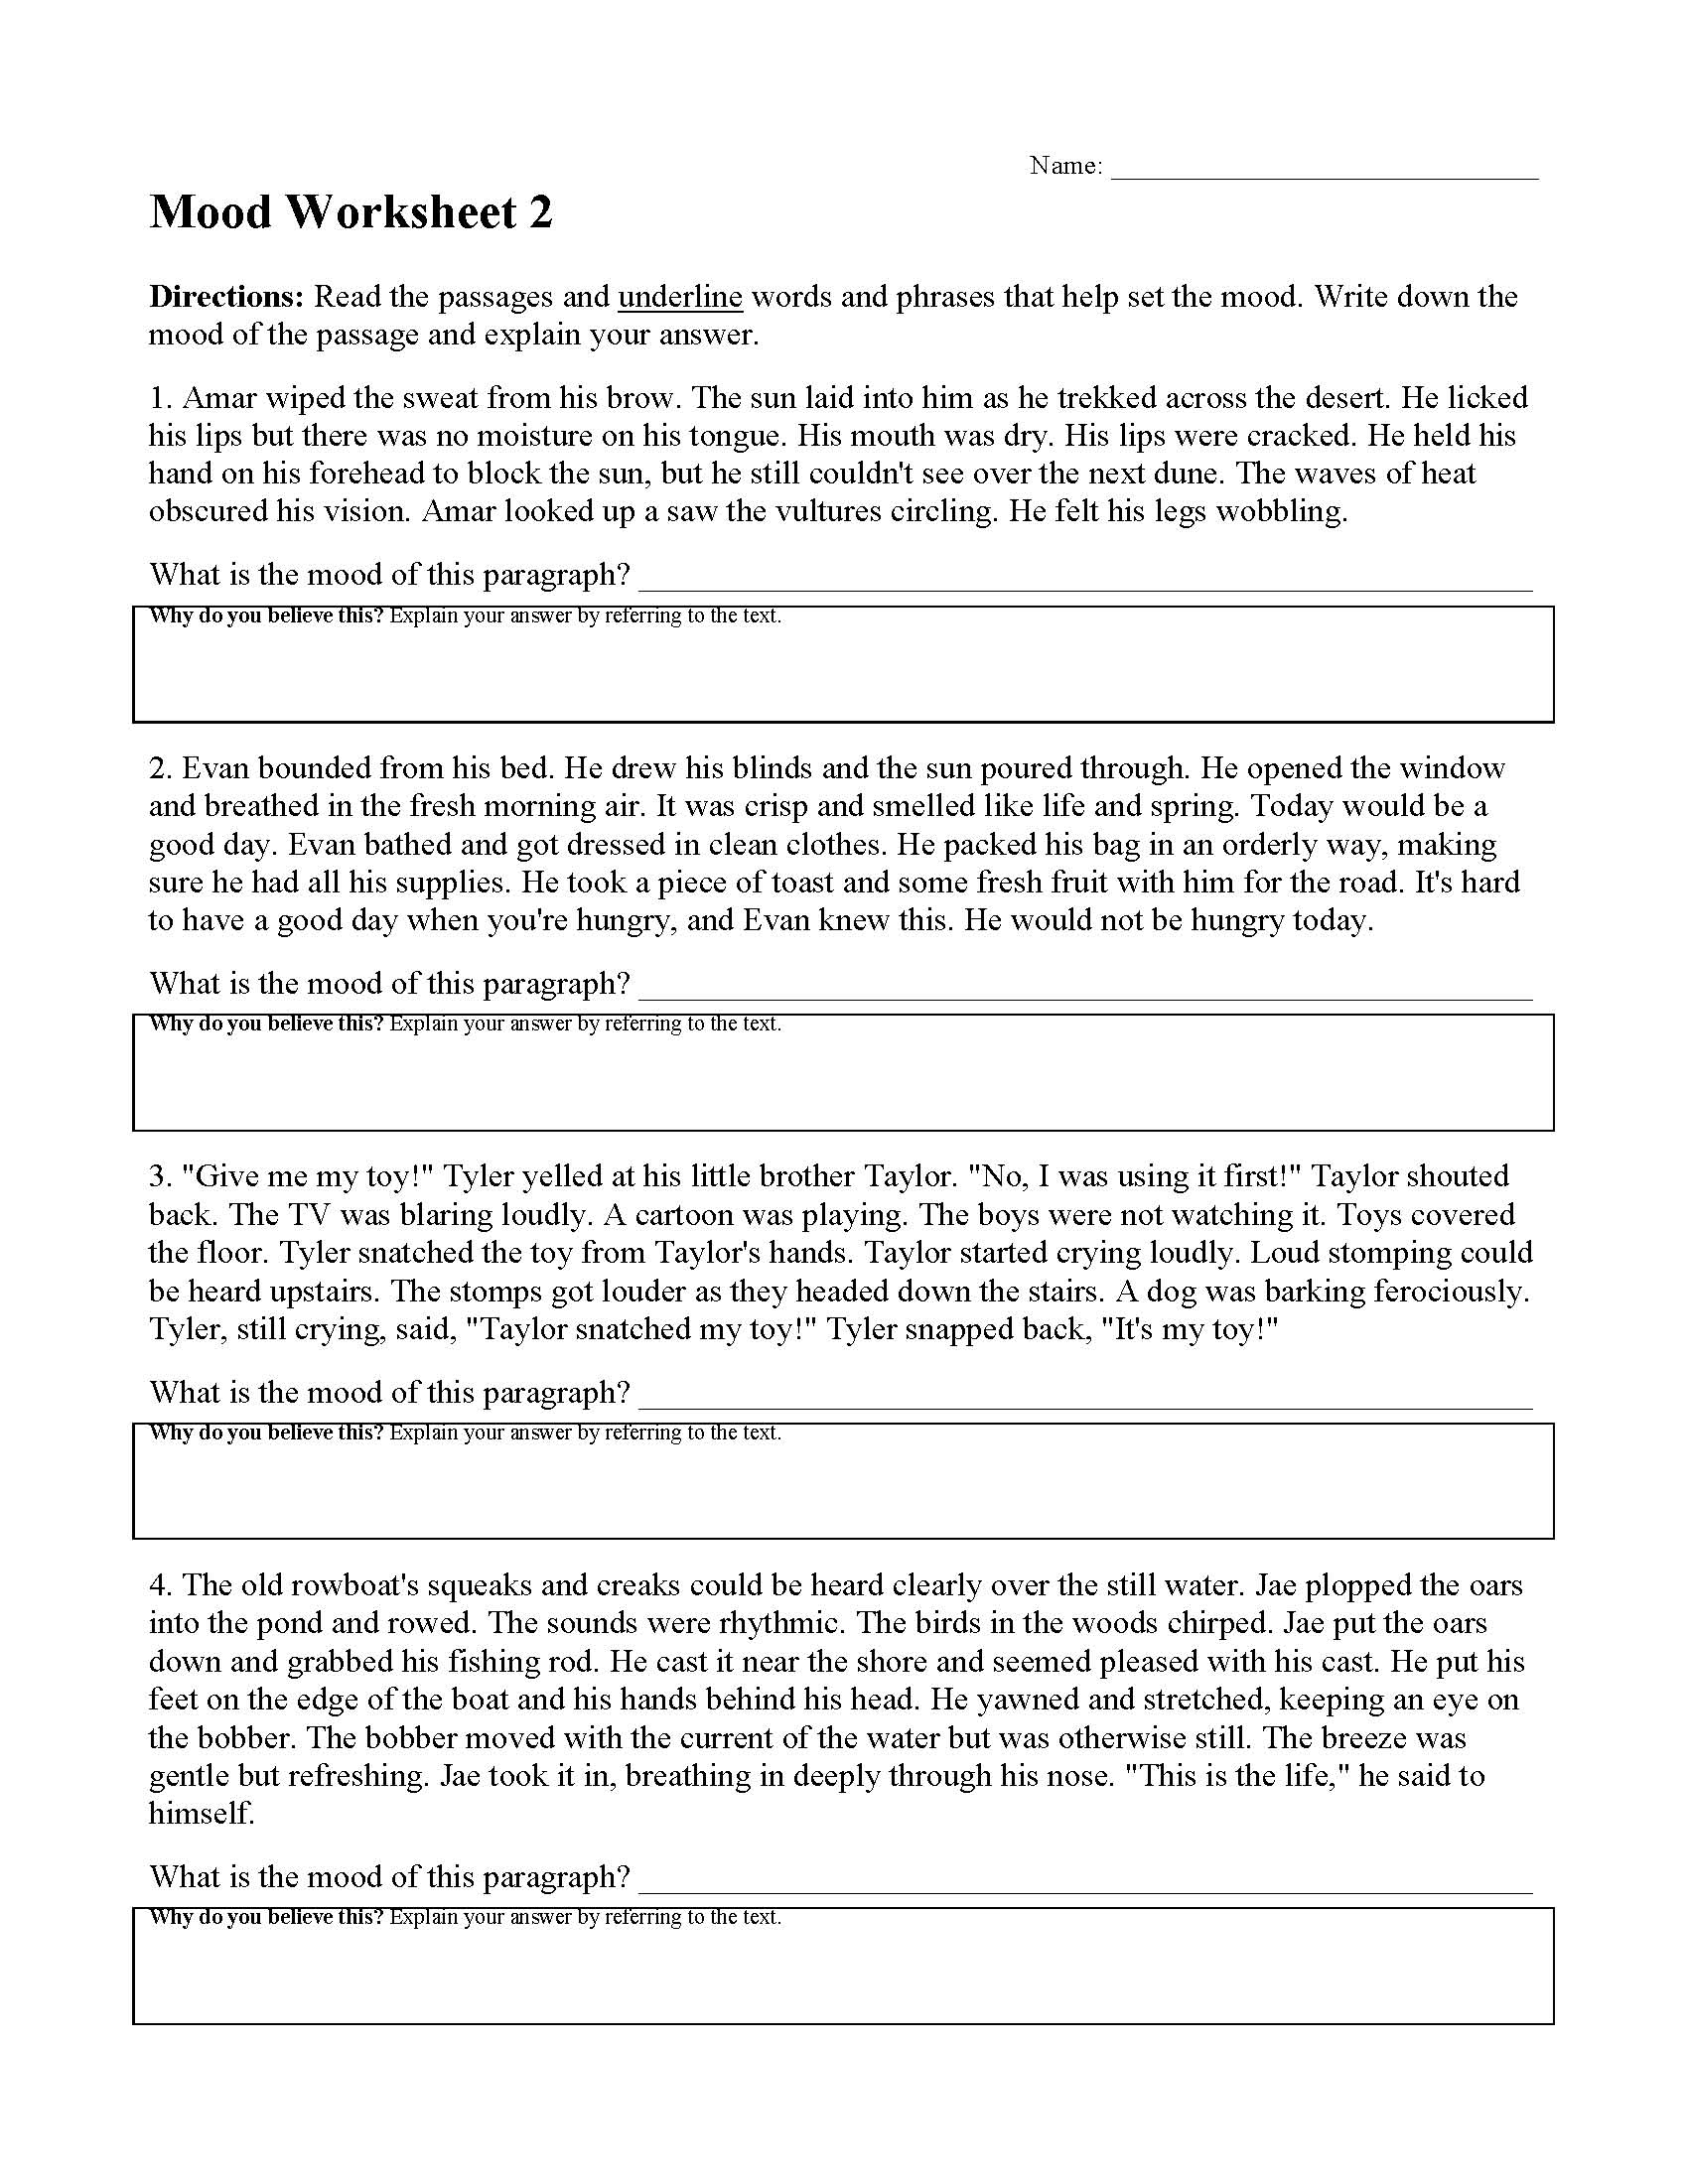 This is a preview image of Mood Worksheet 2. Click on it to enlarge it or view the source file.